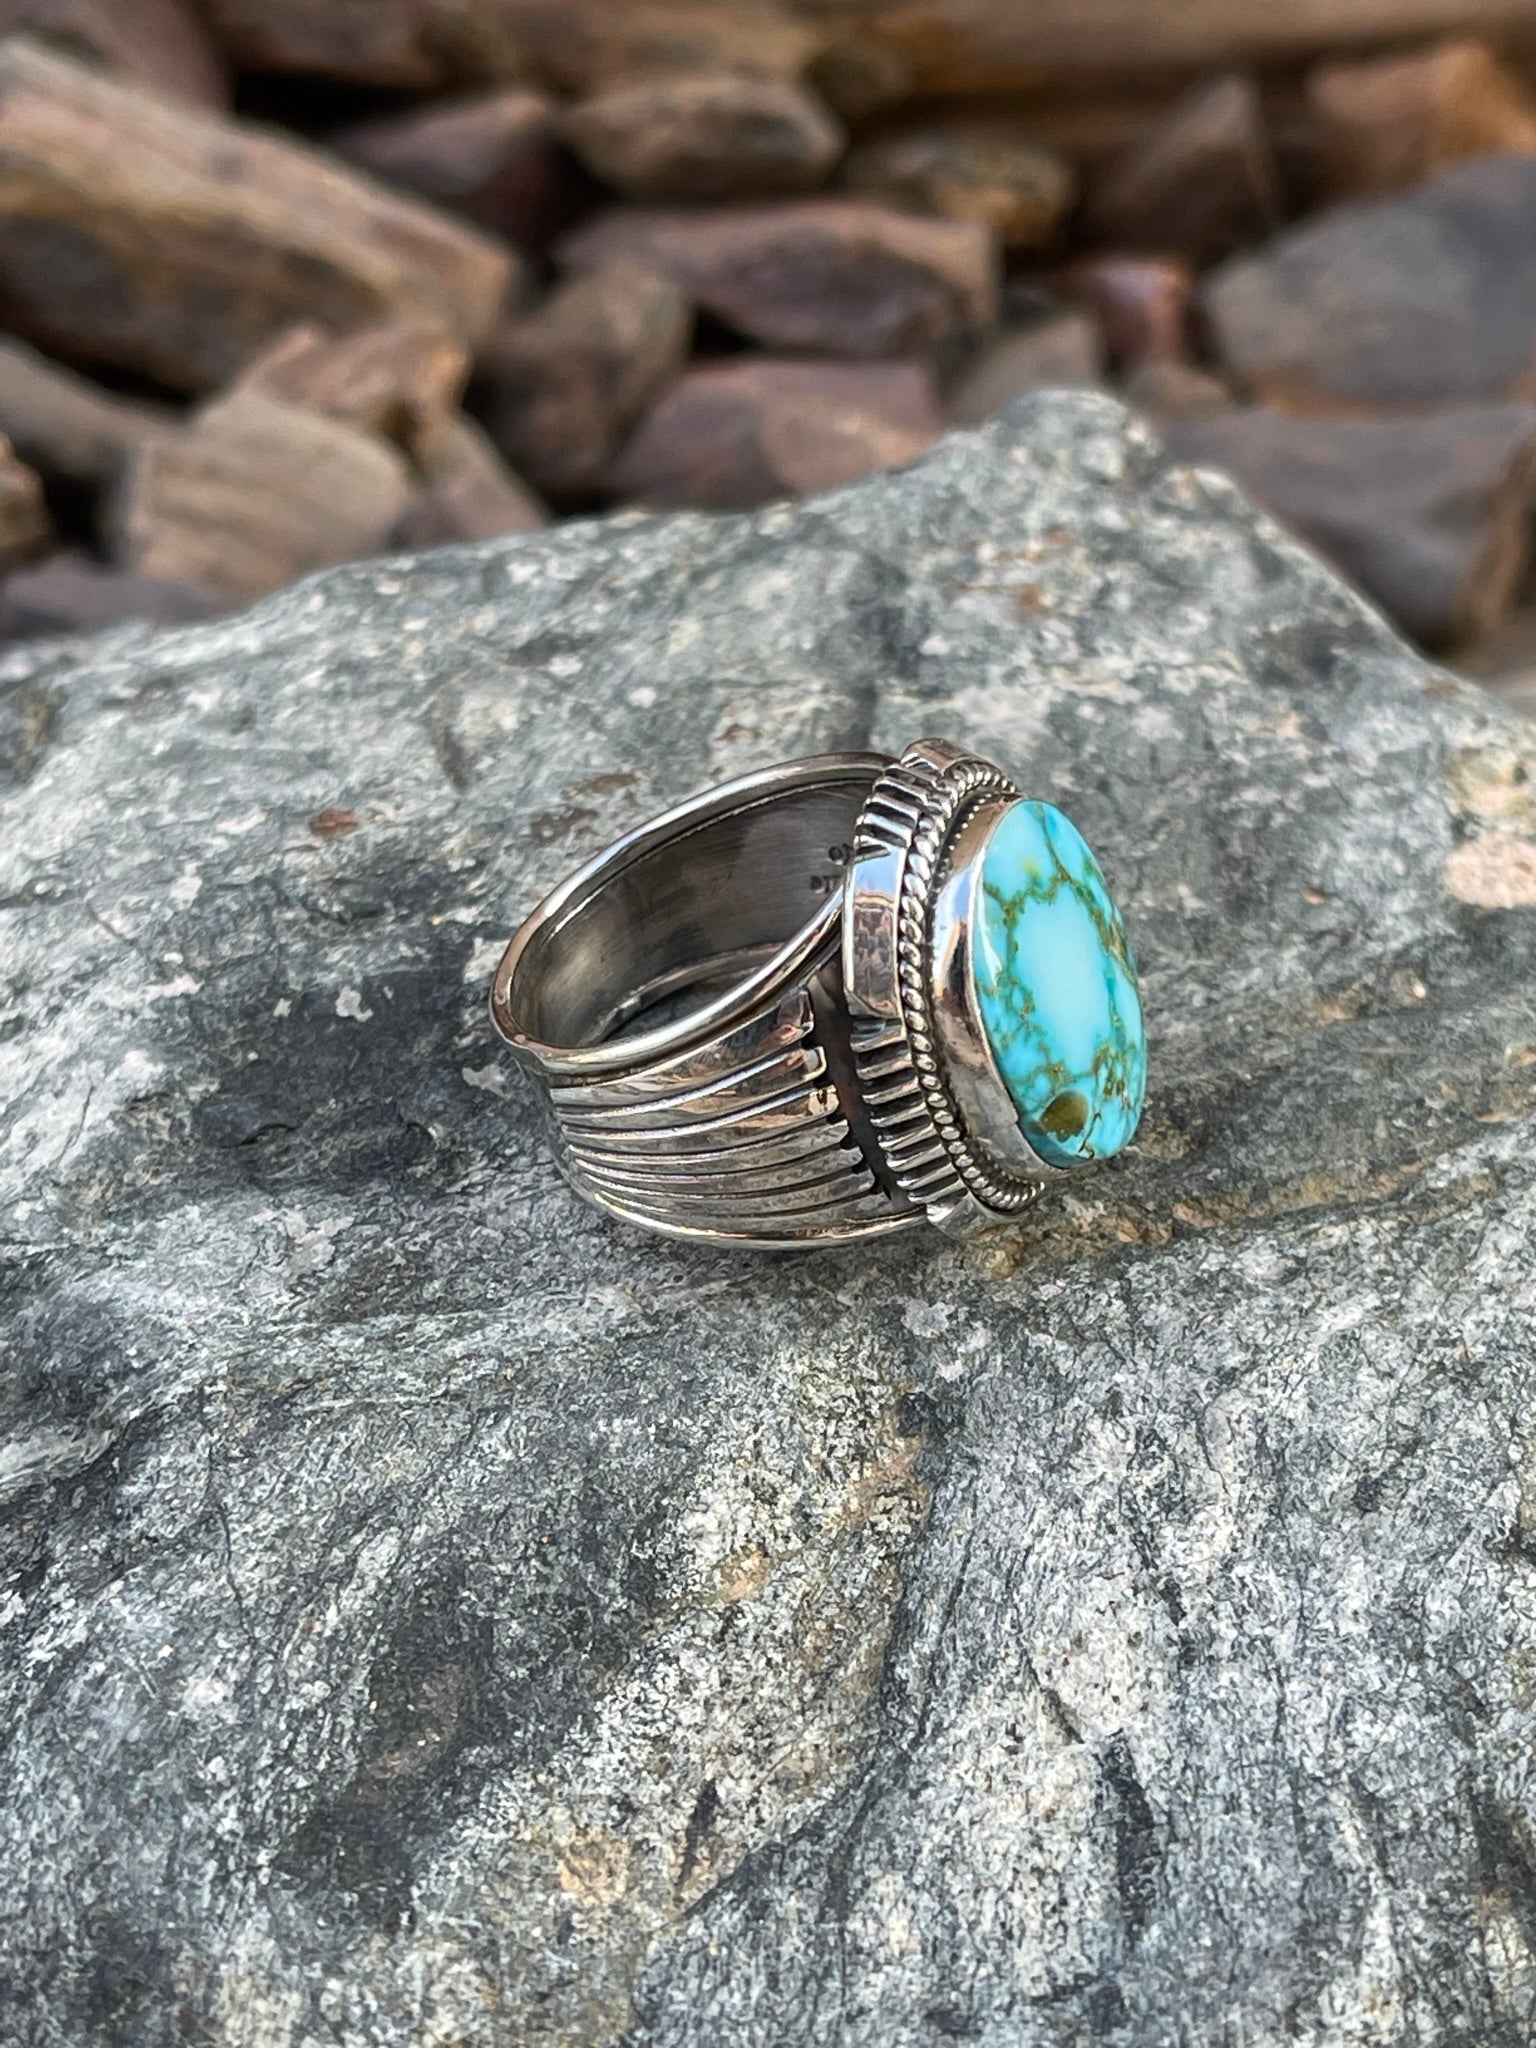 Hand Crafted Sterling Silver Kingman Turquoise Men or Women's Ring - Size 9 1/2